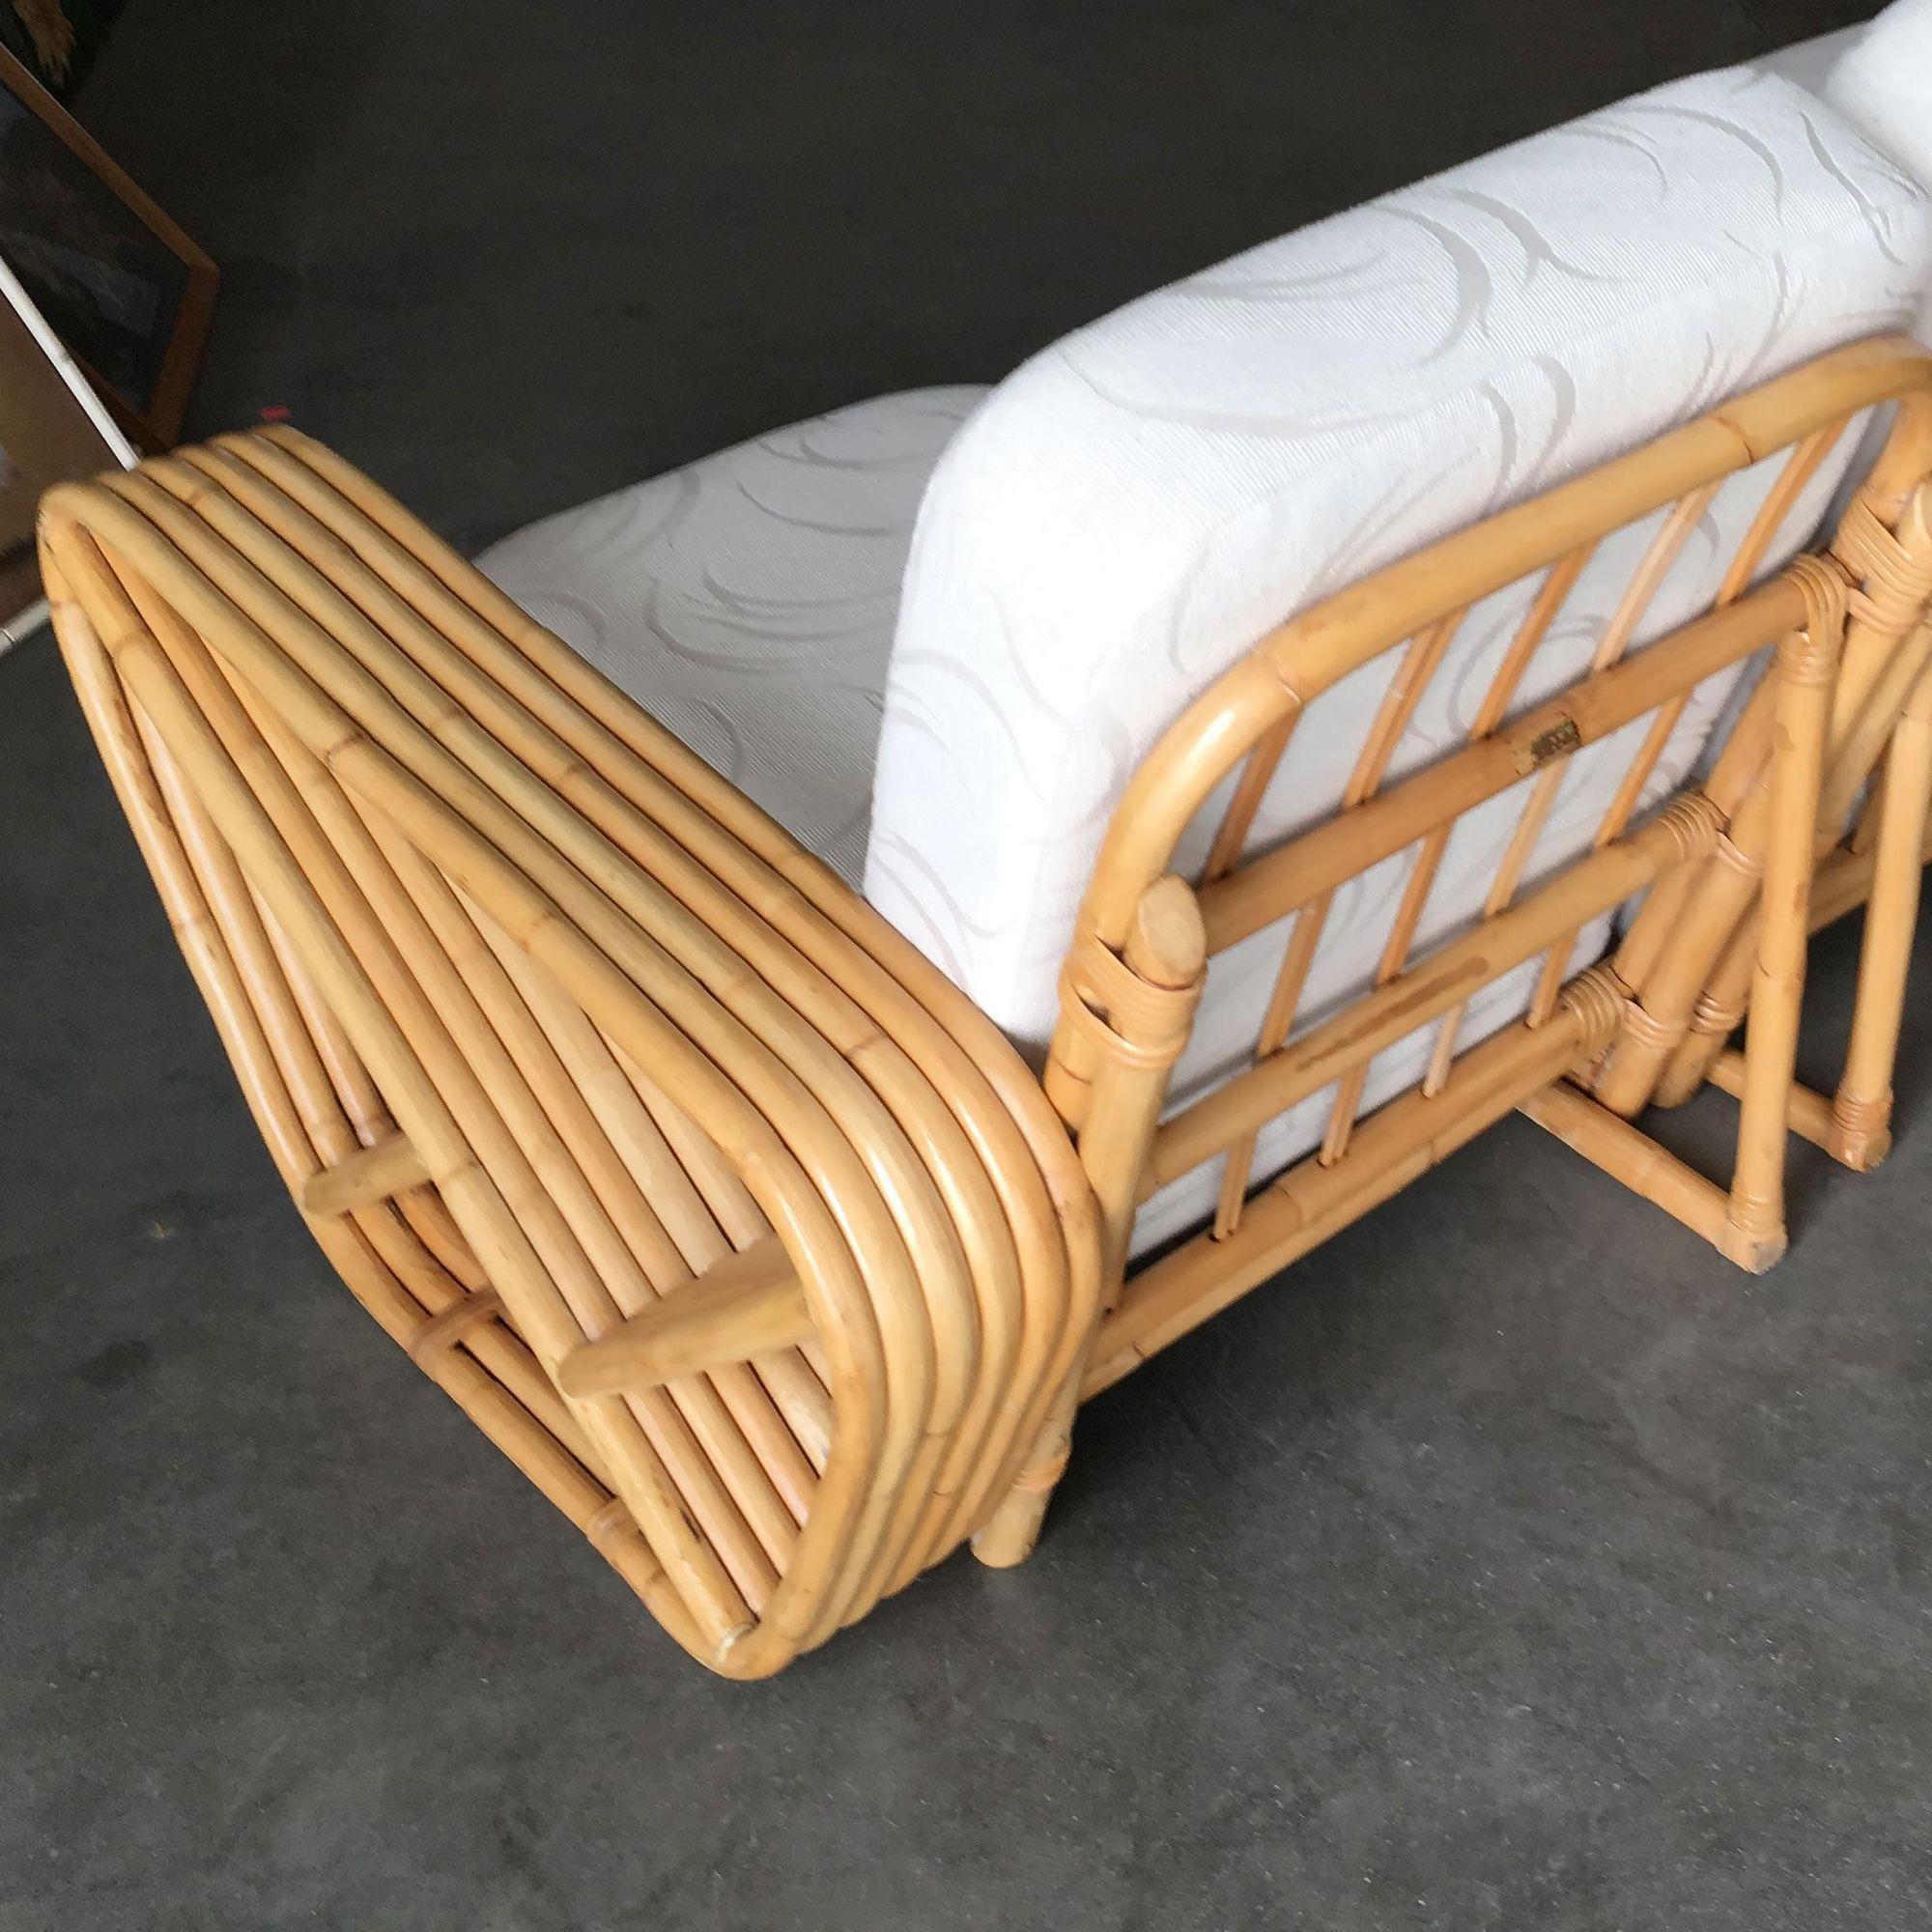 Restored 6-Strand Square Pretzel 3 Seat Rattan Corner Sofa W/ Side Table In Excellent Condition For Sale In Van Nuys, CA